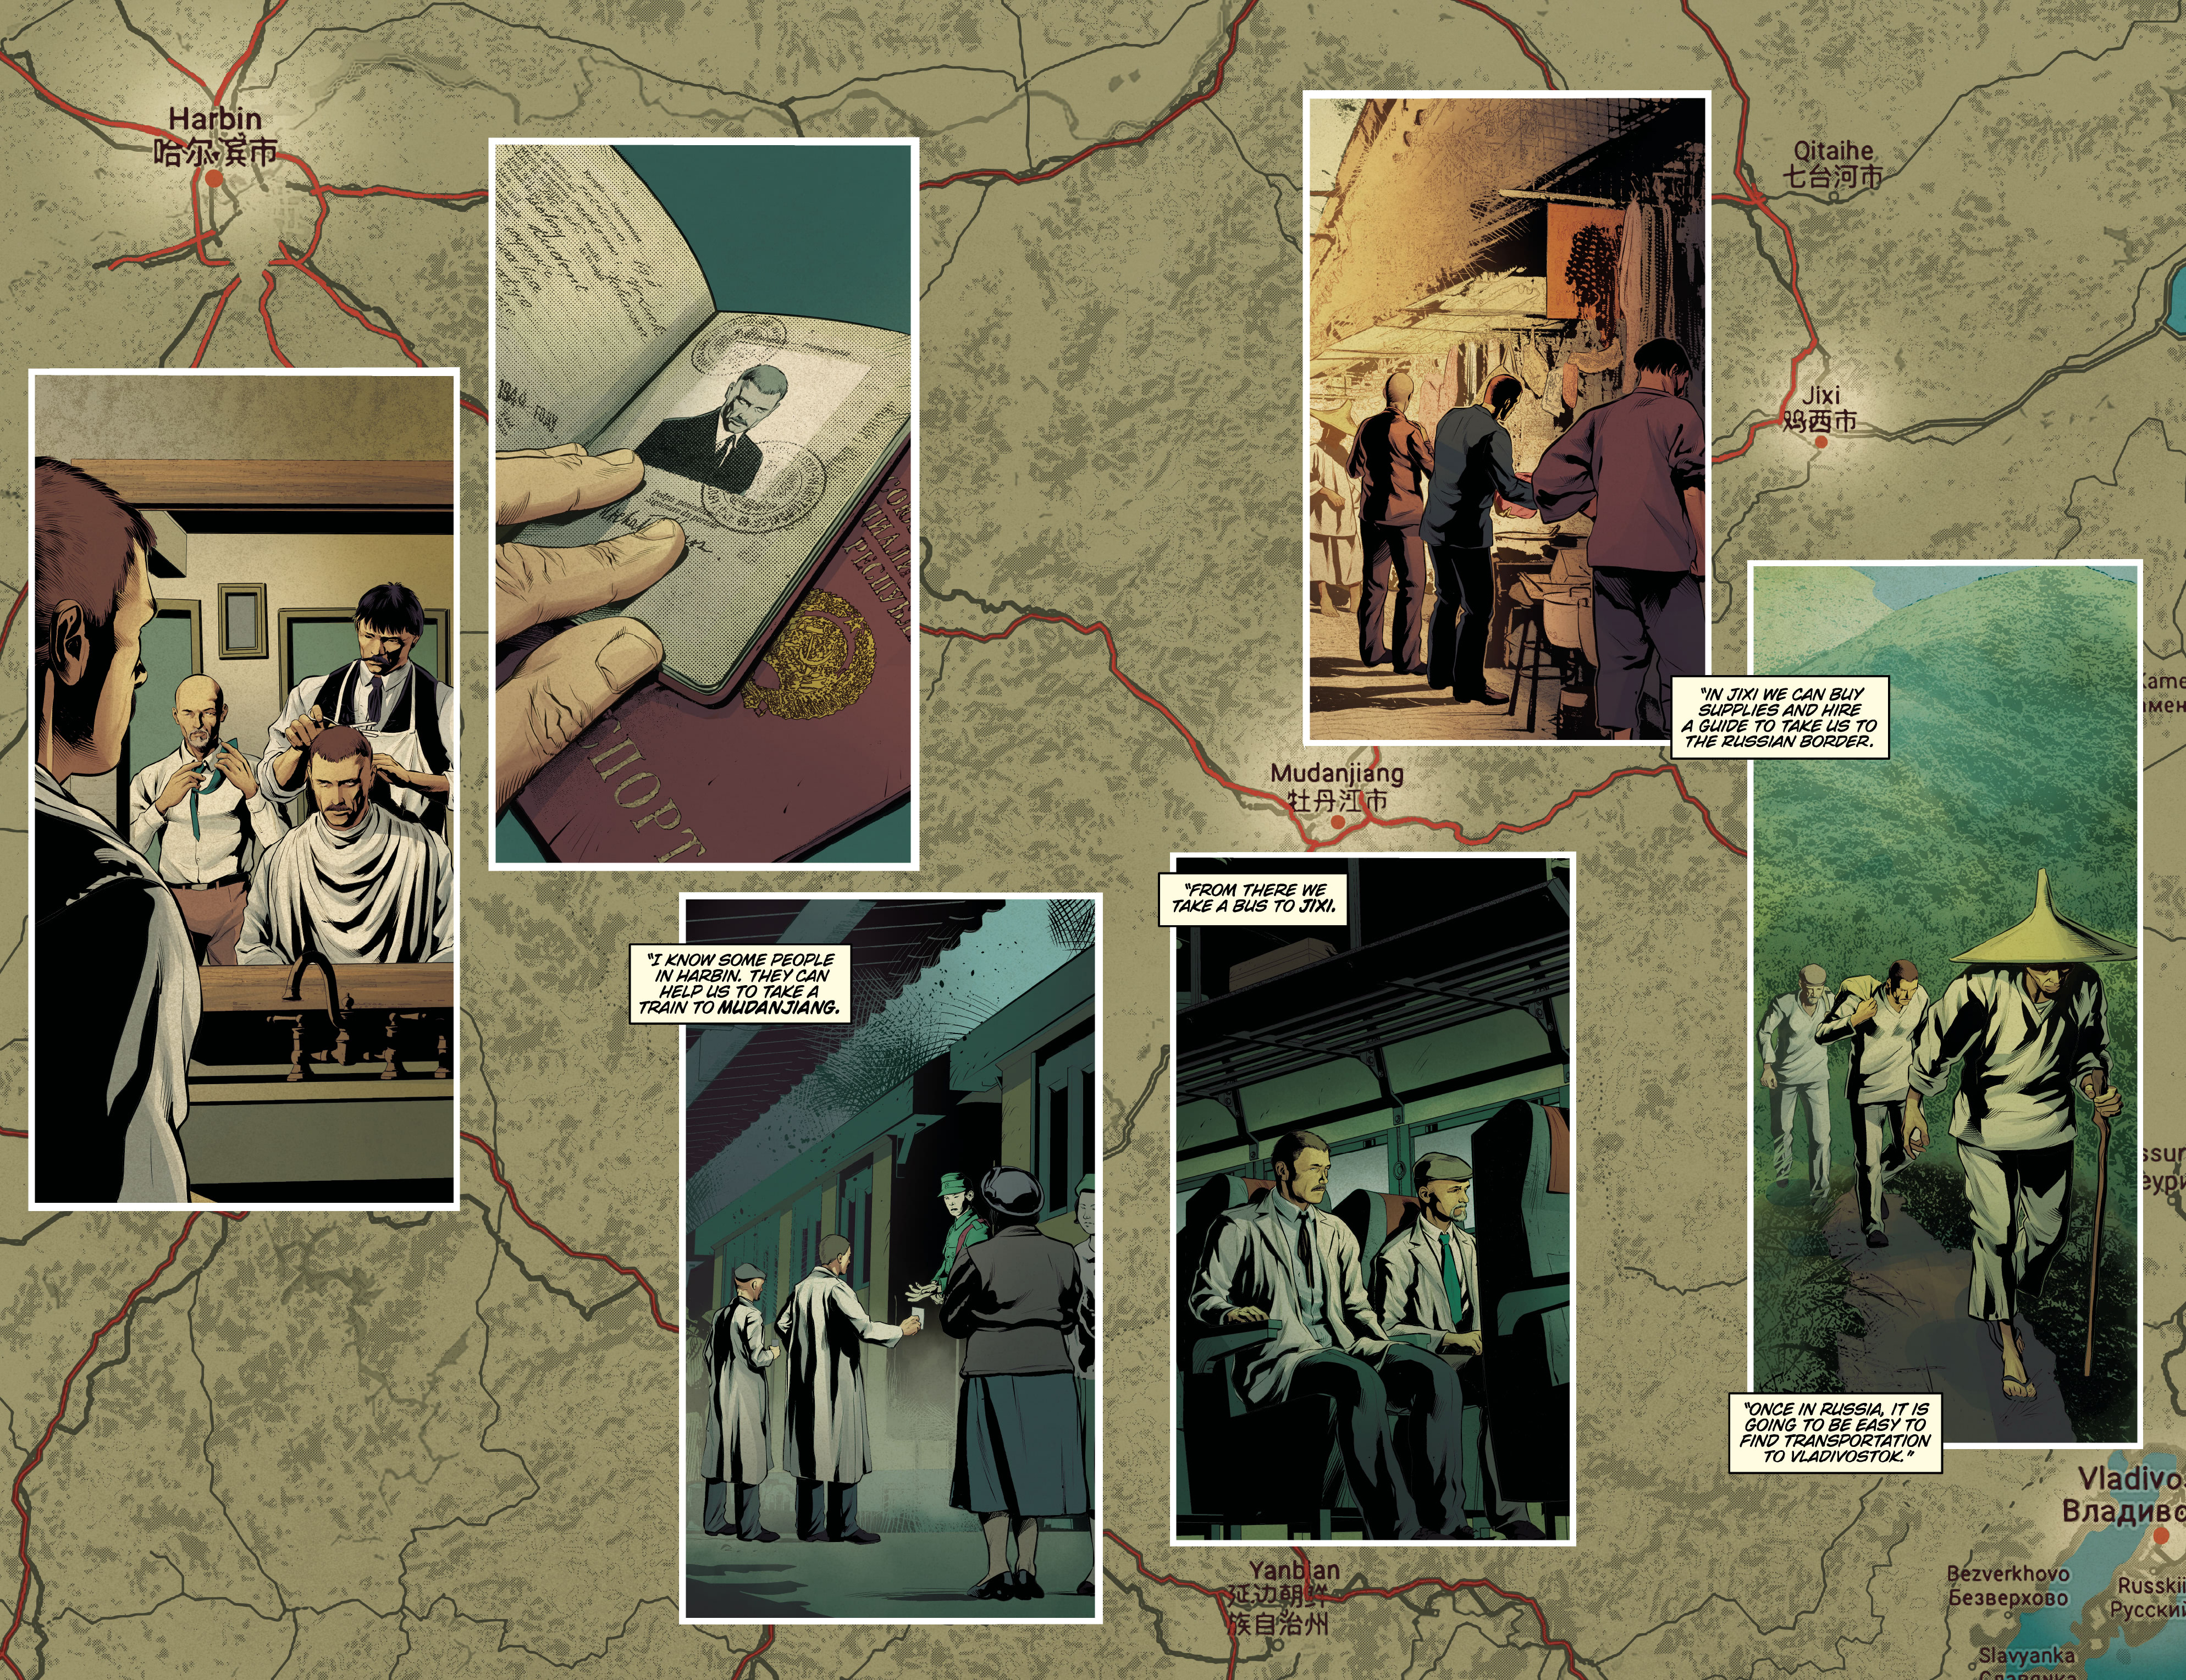 Read online The Collector: Unit 731 comic -  Issue #3 - 6